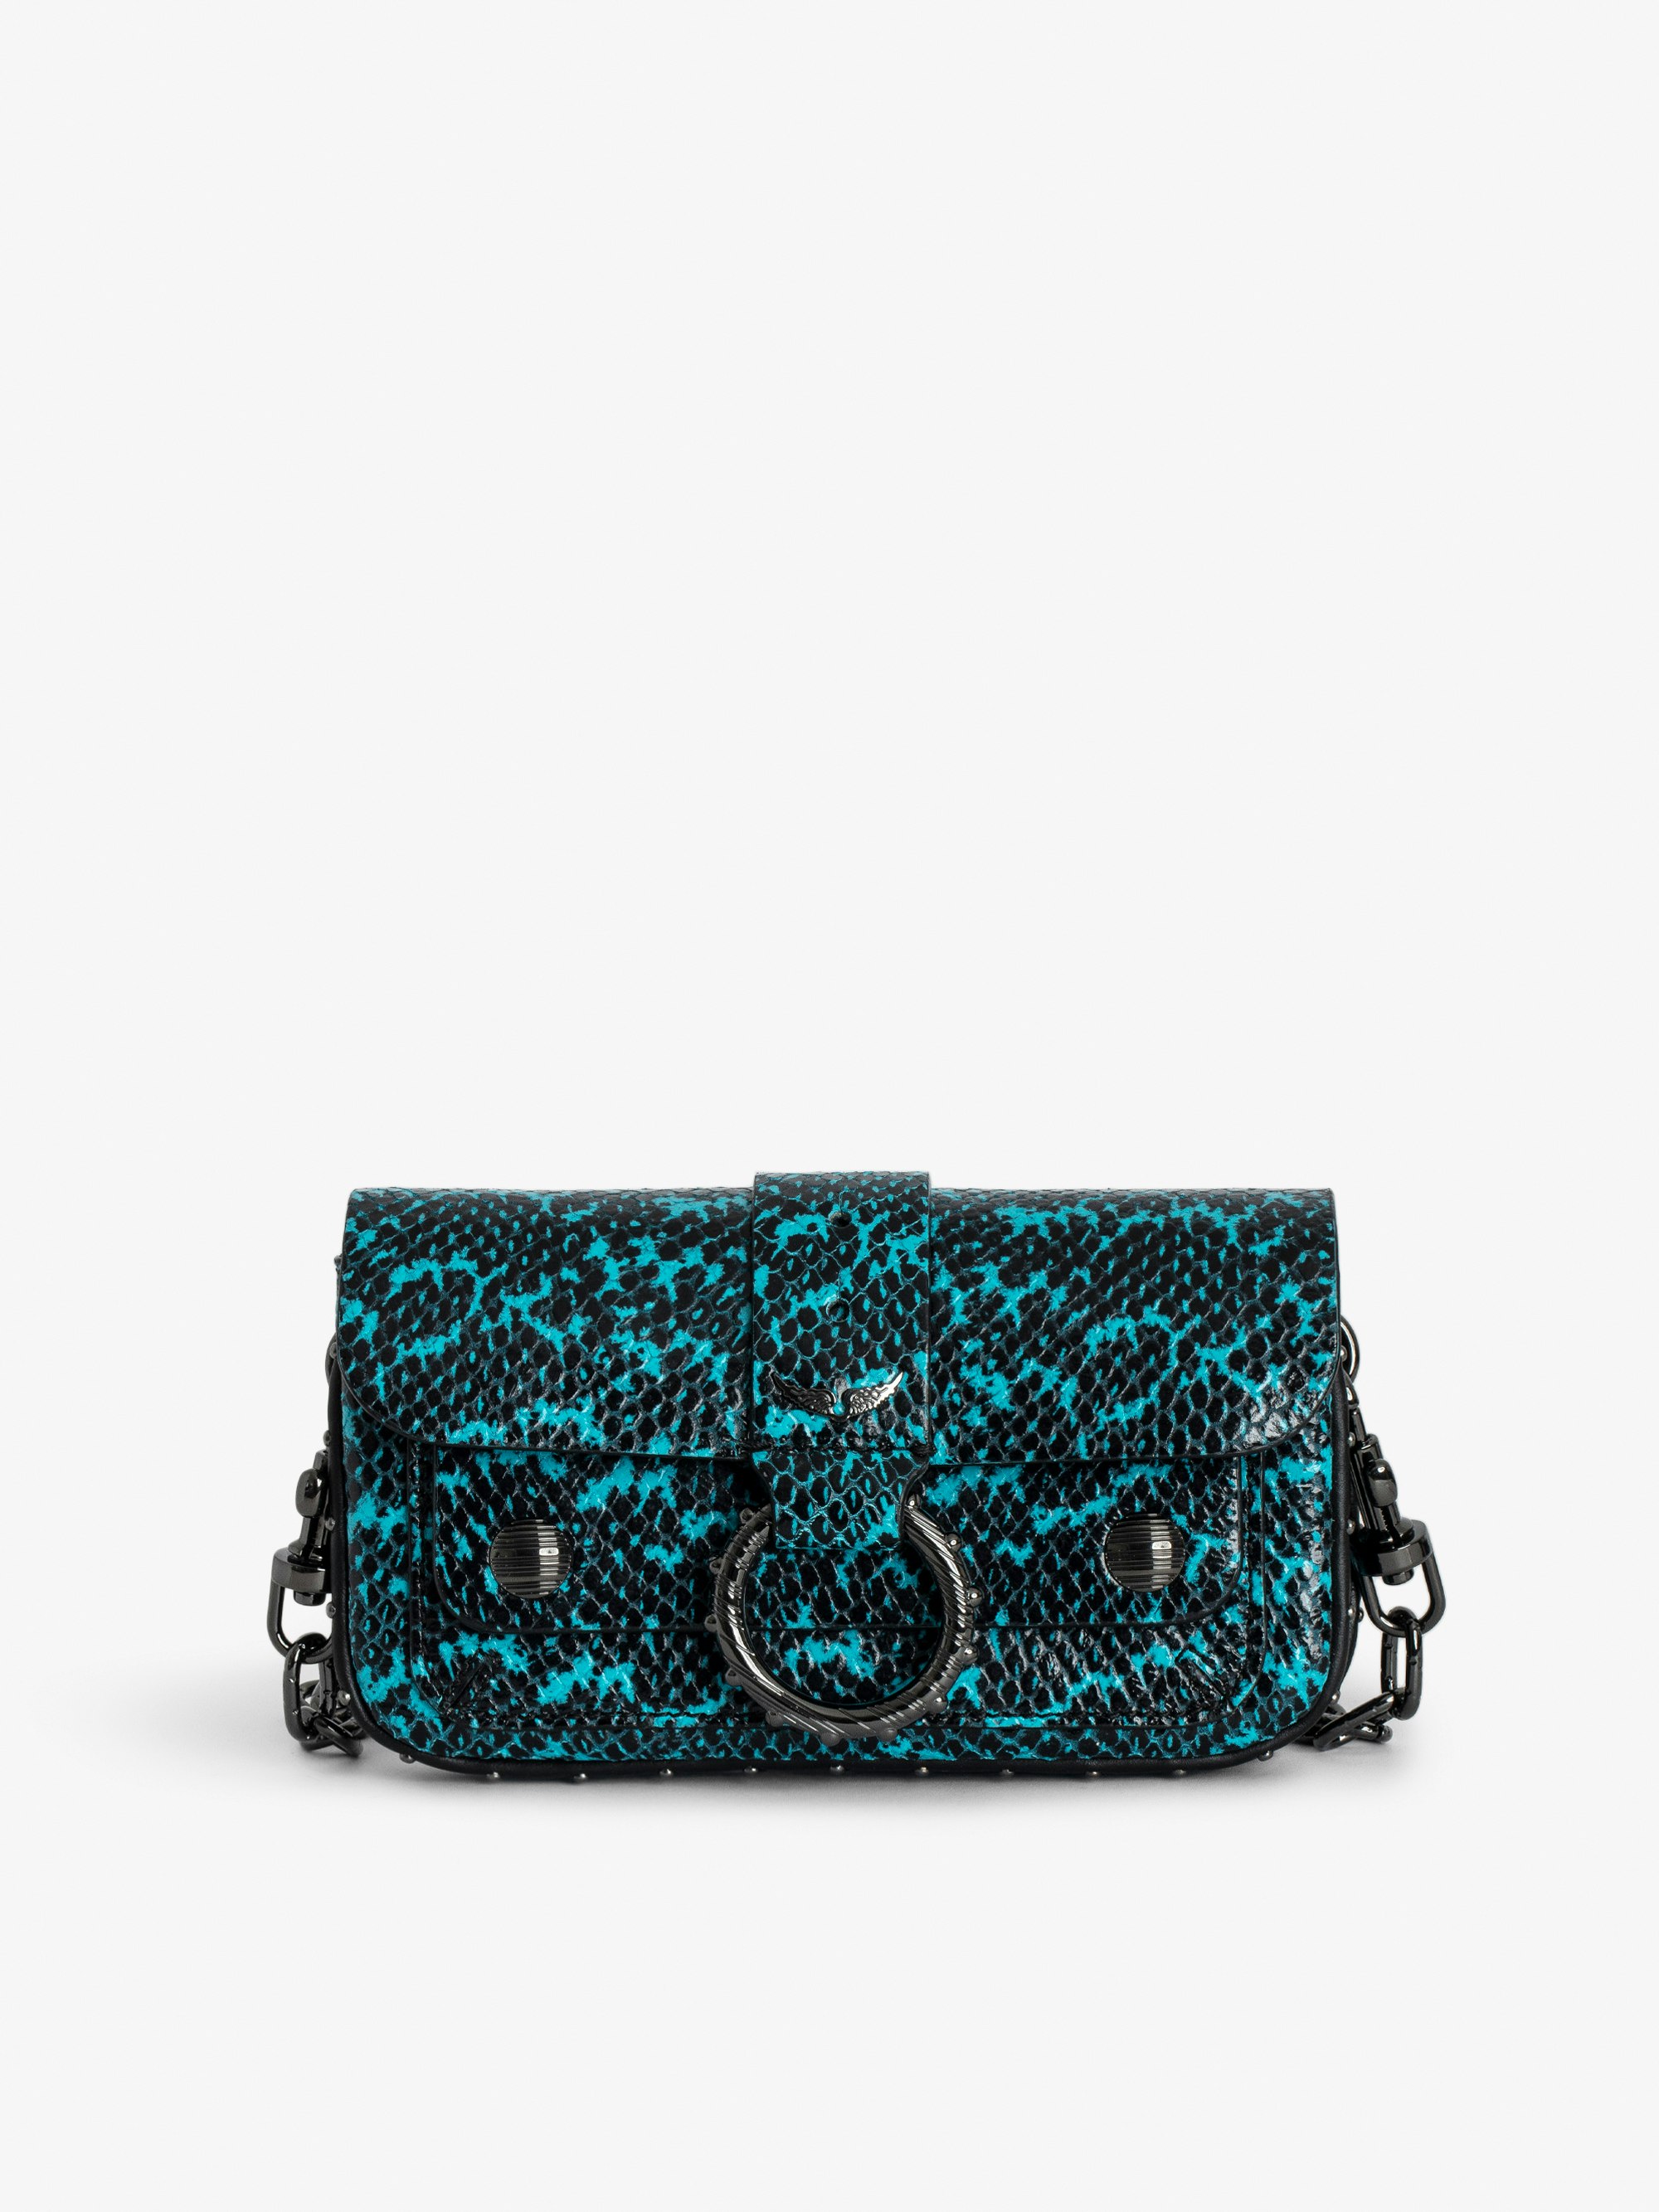 Kate Wallet Wild Bag - Designed by Kate Moss for Zadig&Voltaire.  Blue snakeskin-effect leather mini bag with ring and chain.